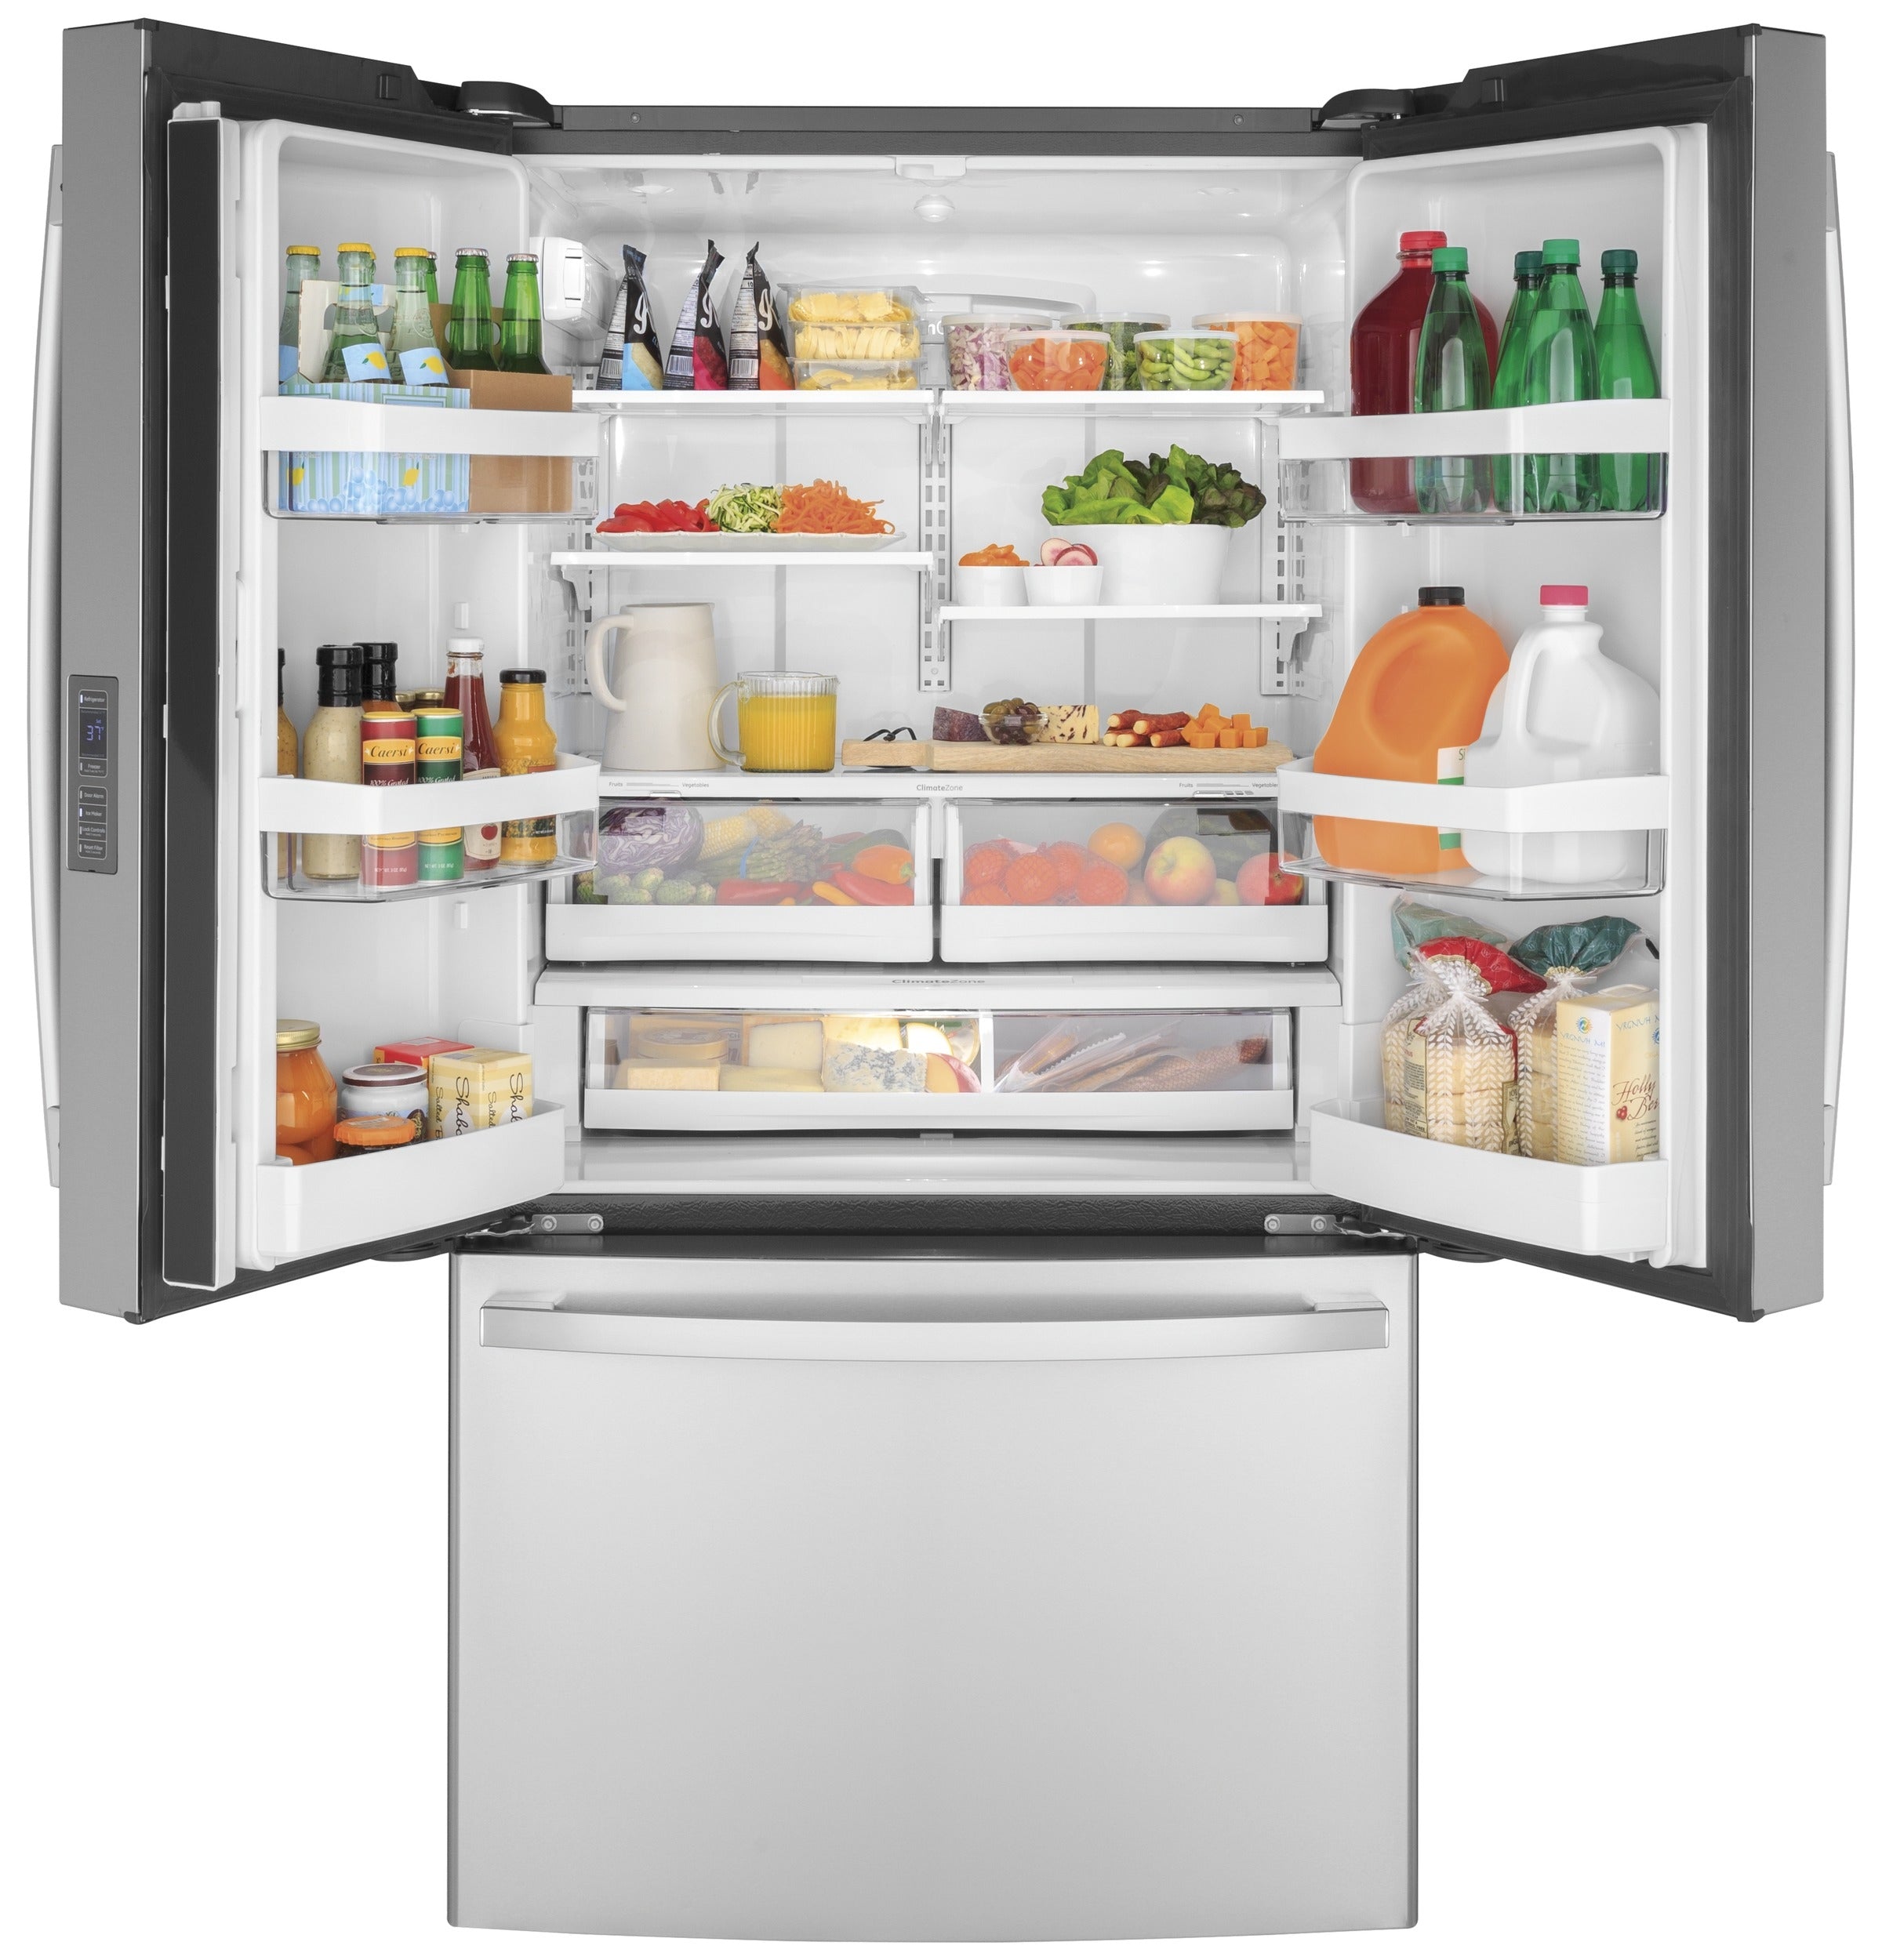 GE - 35.5 Inch 23.1 cu. ft French Door Refrigerator in Stainless - GWE23GYNFS